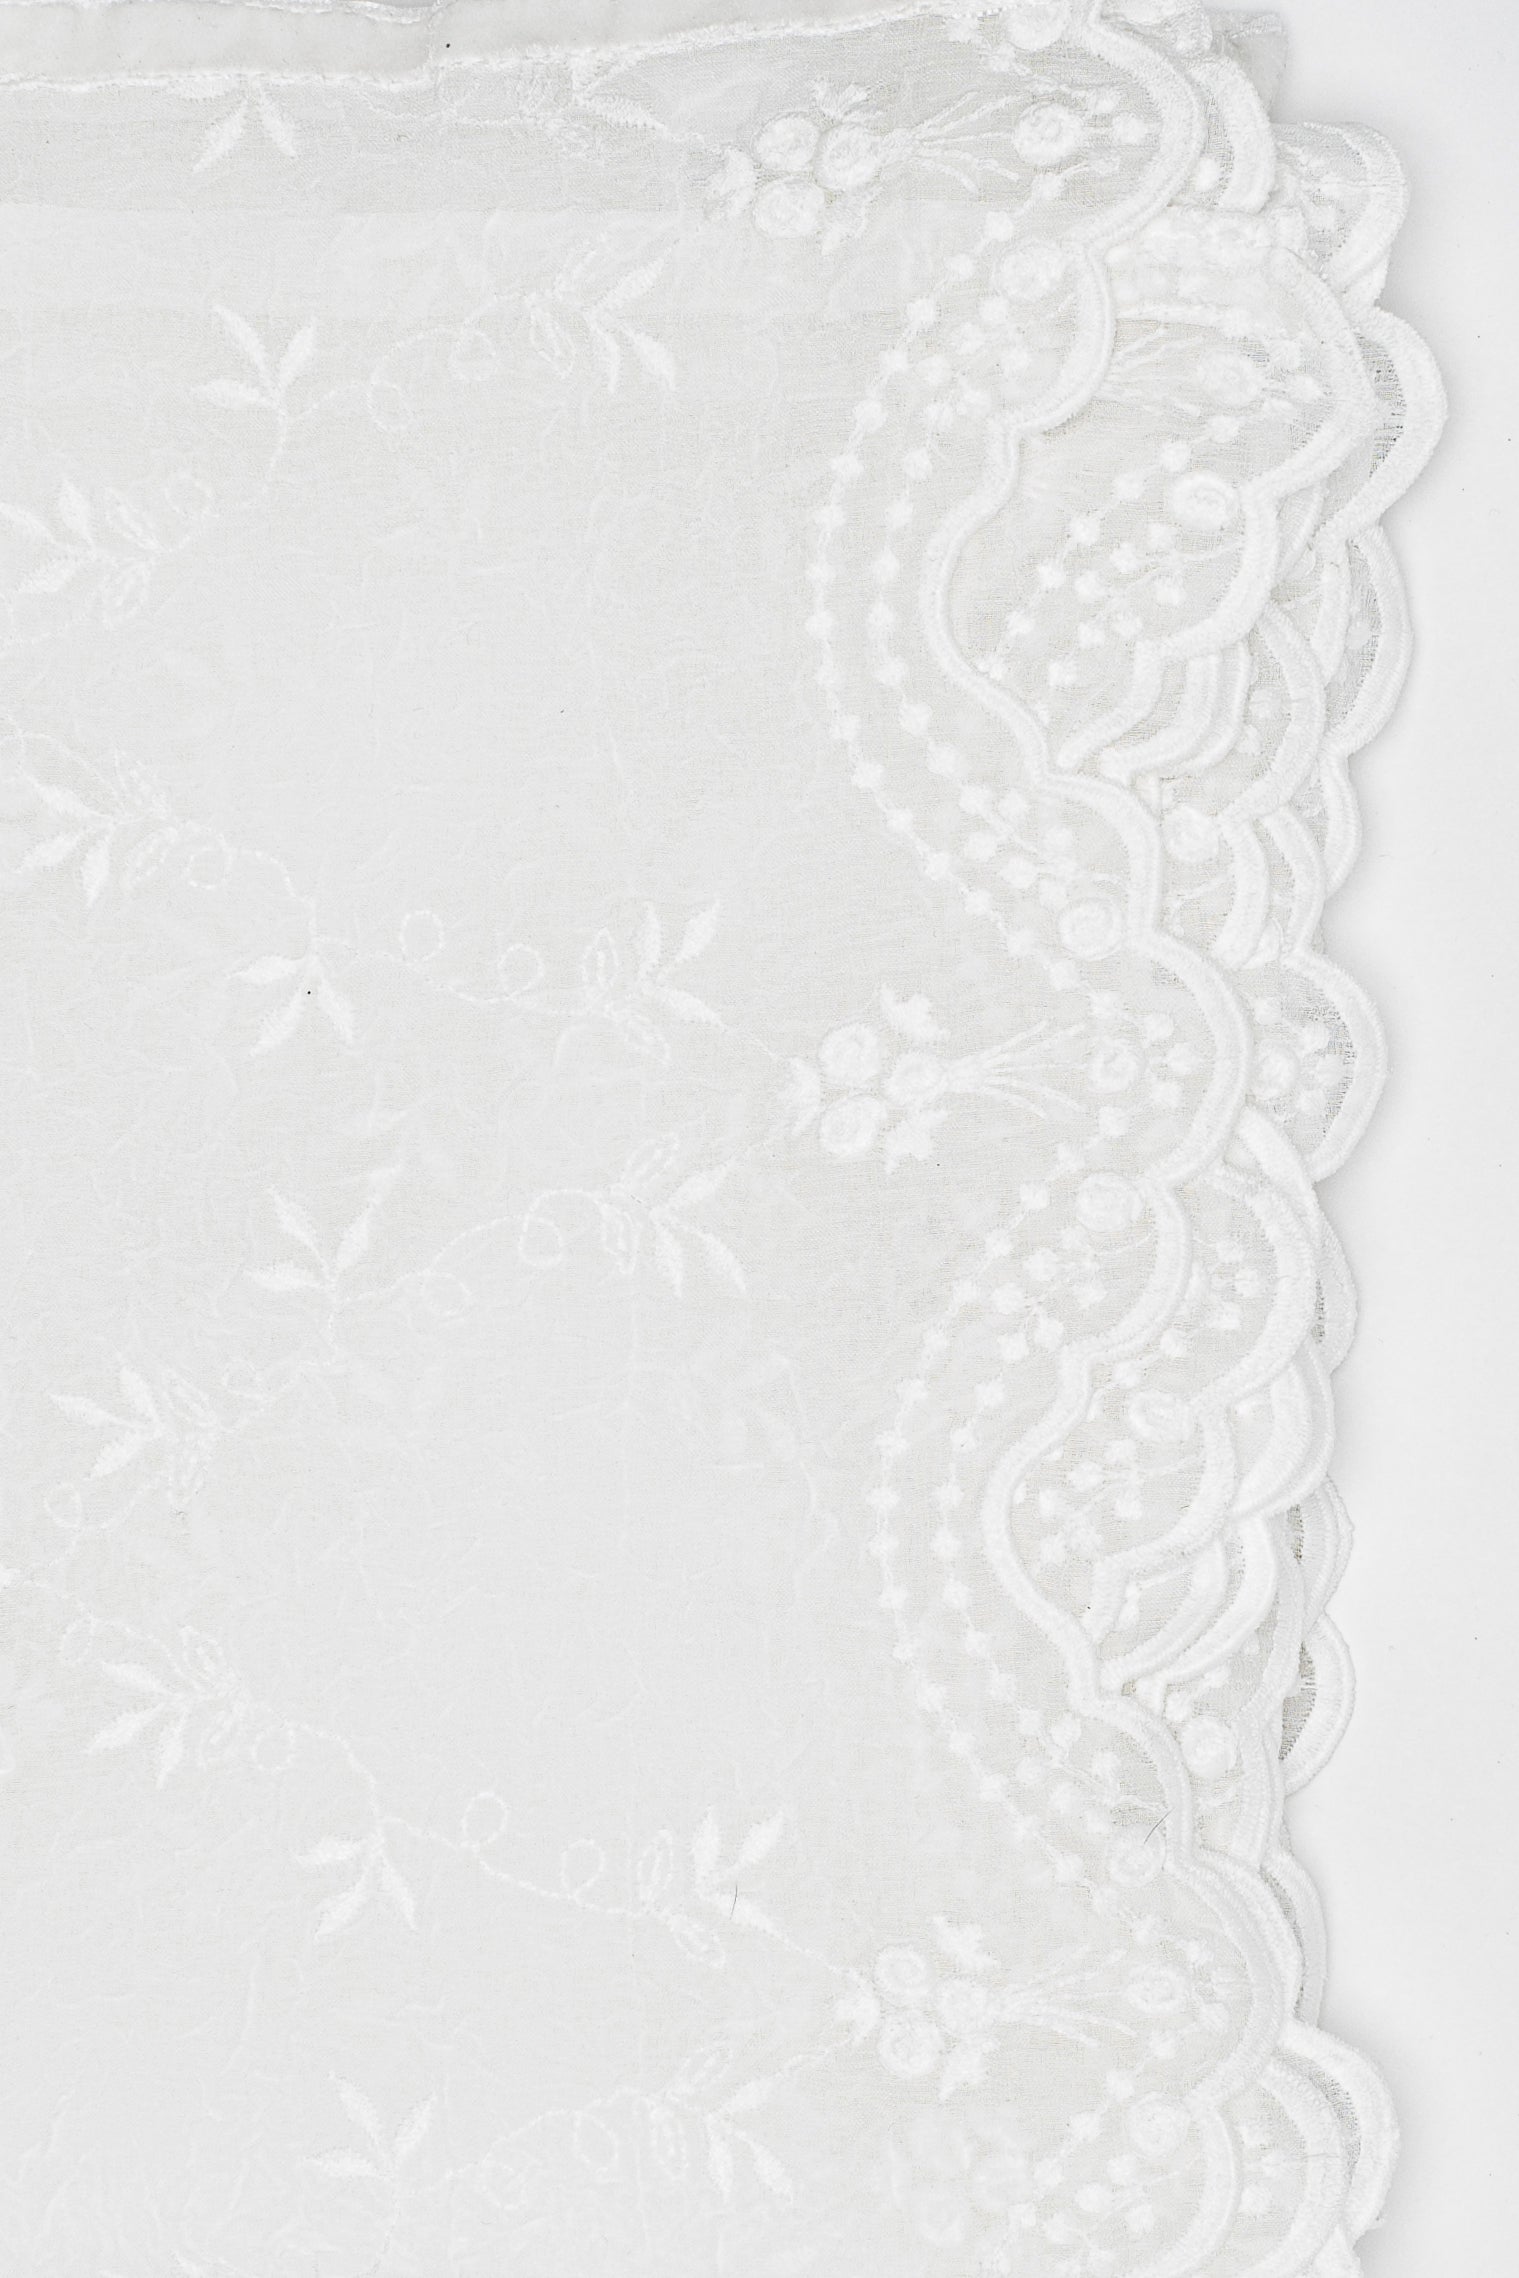 Victoria embroidered voile table cloth - off white and vieux rose – Pimlico